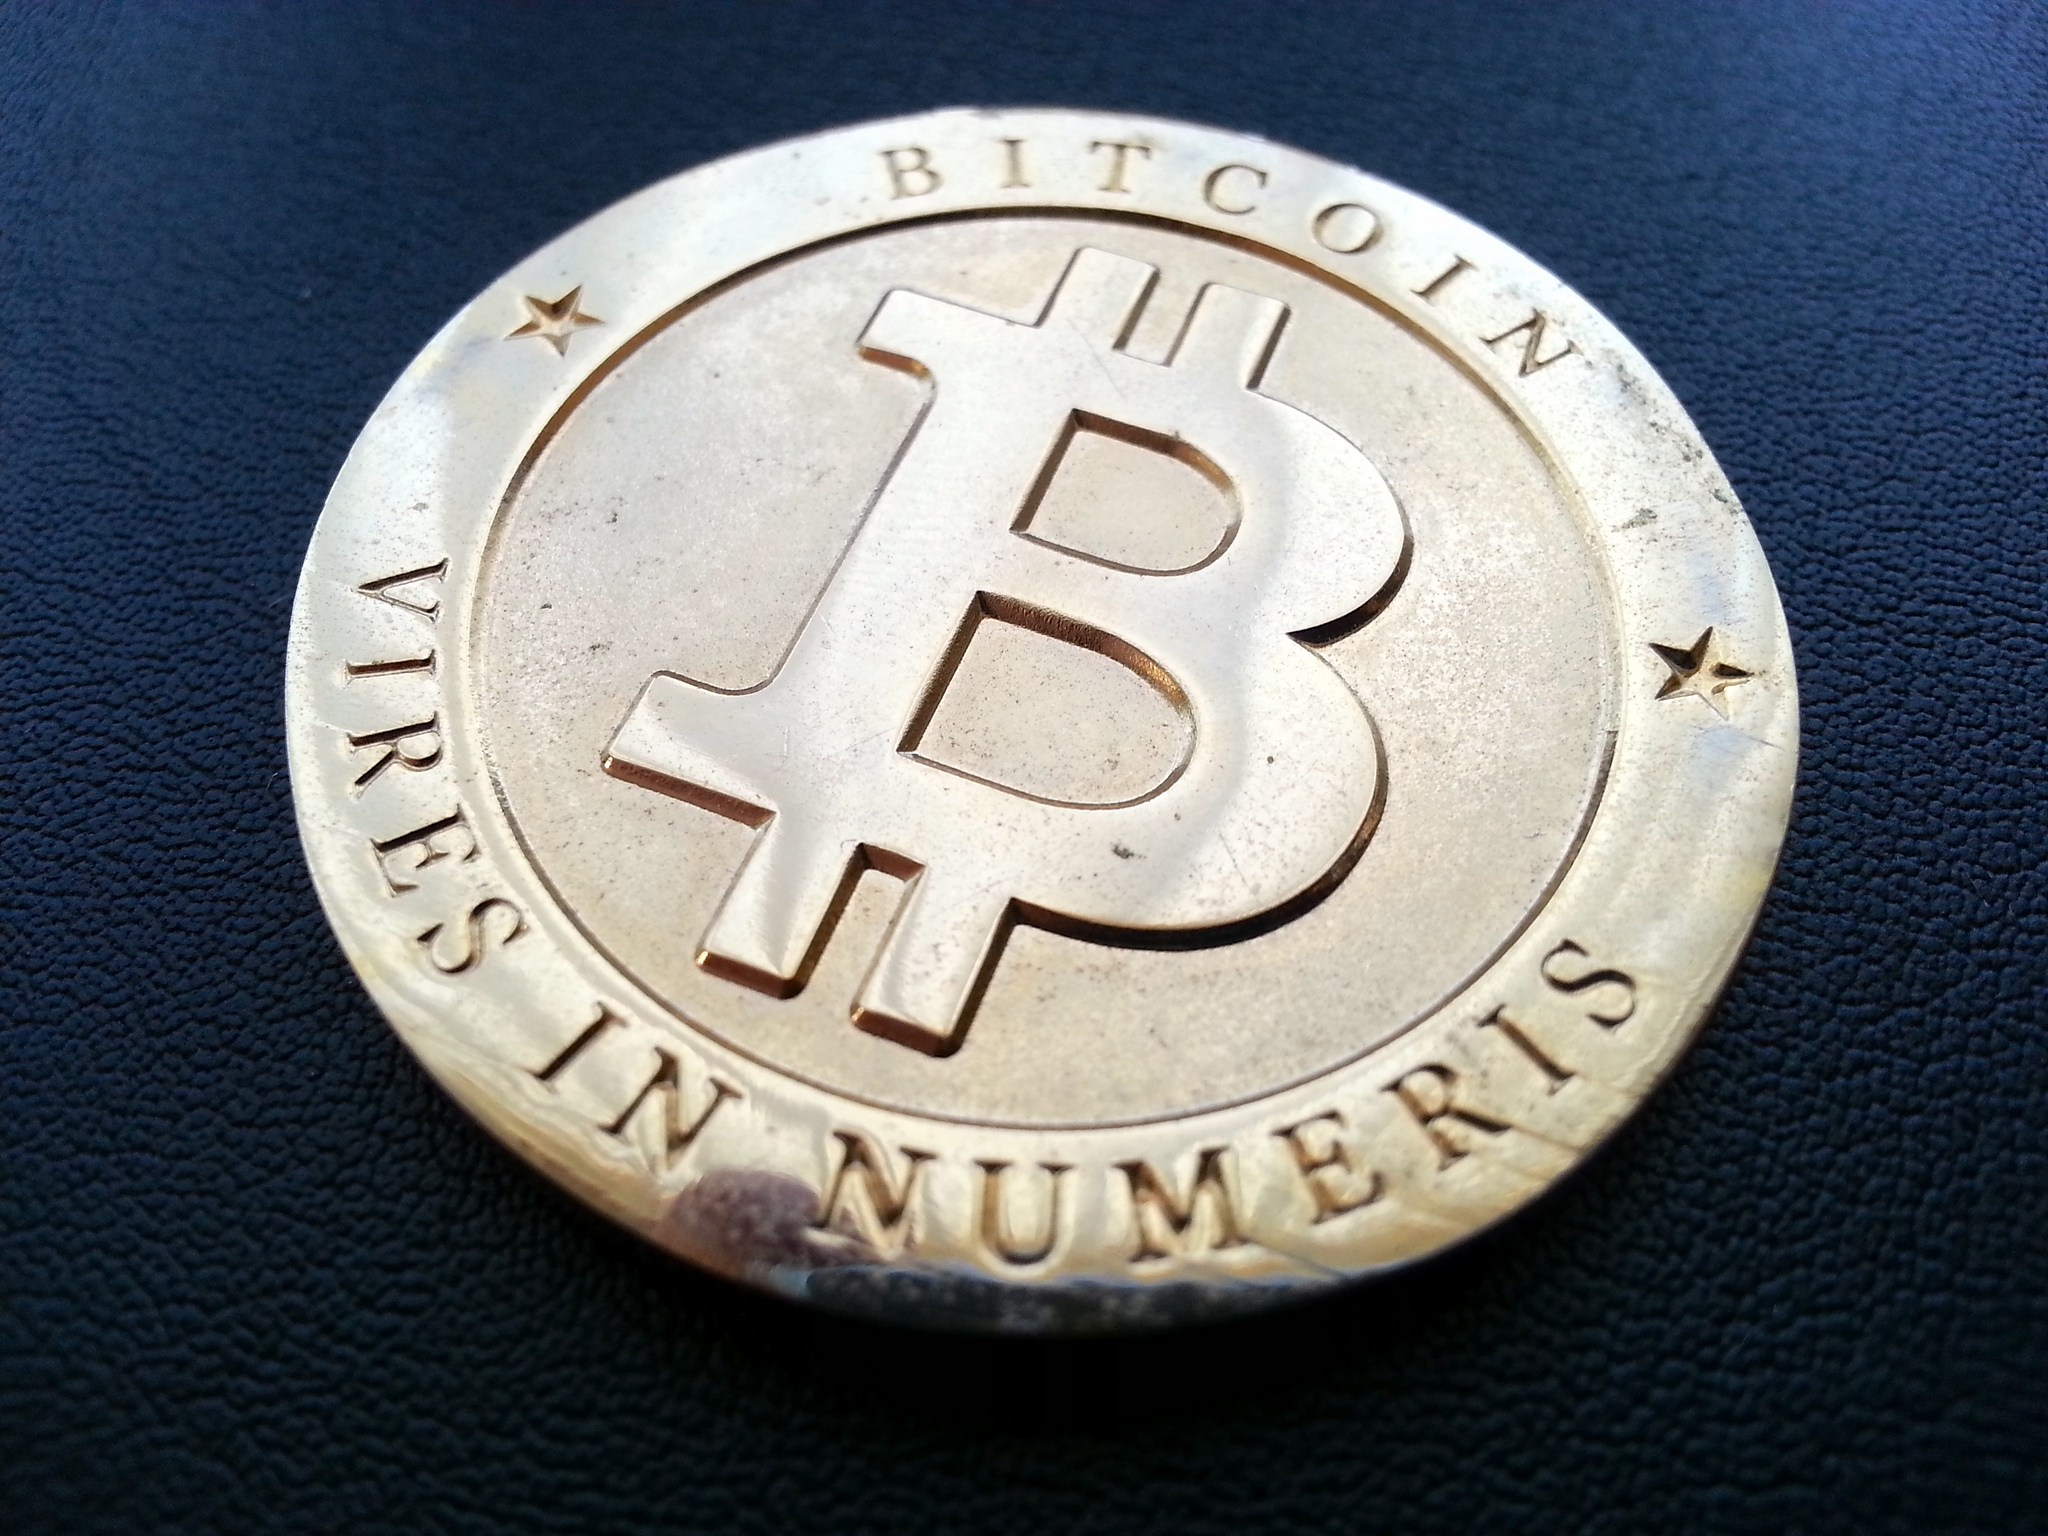 Bitcoin – Online Currency with a Future?